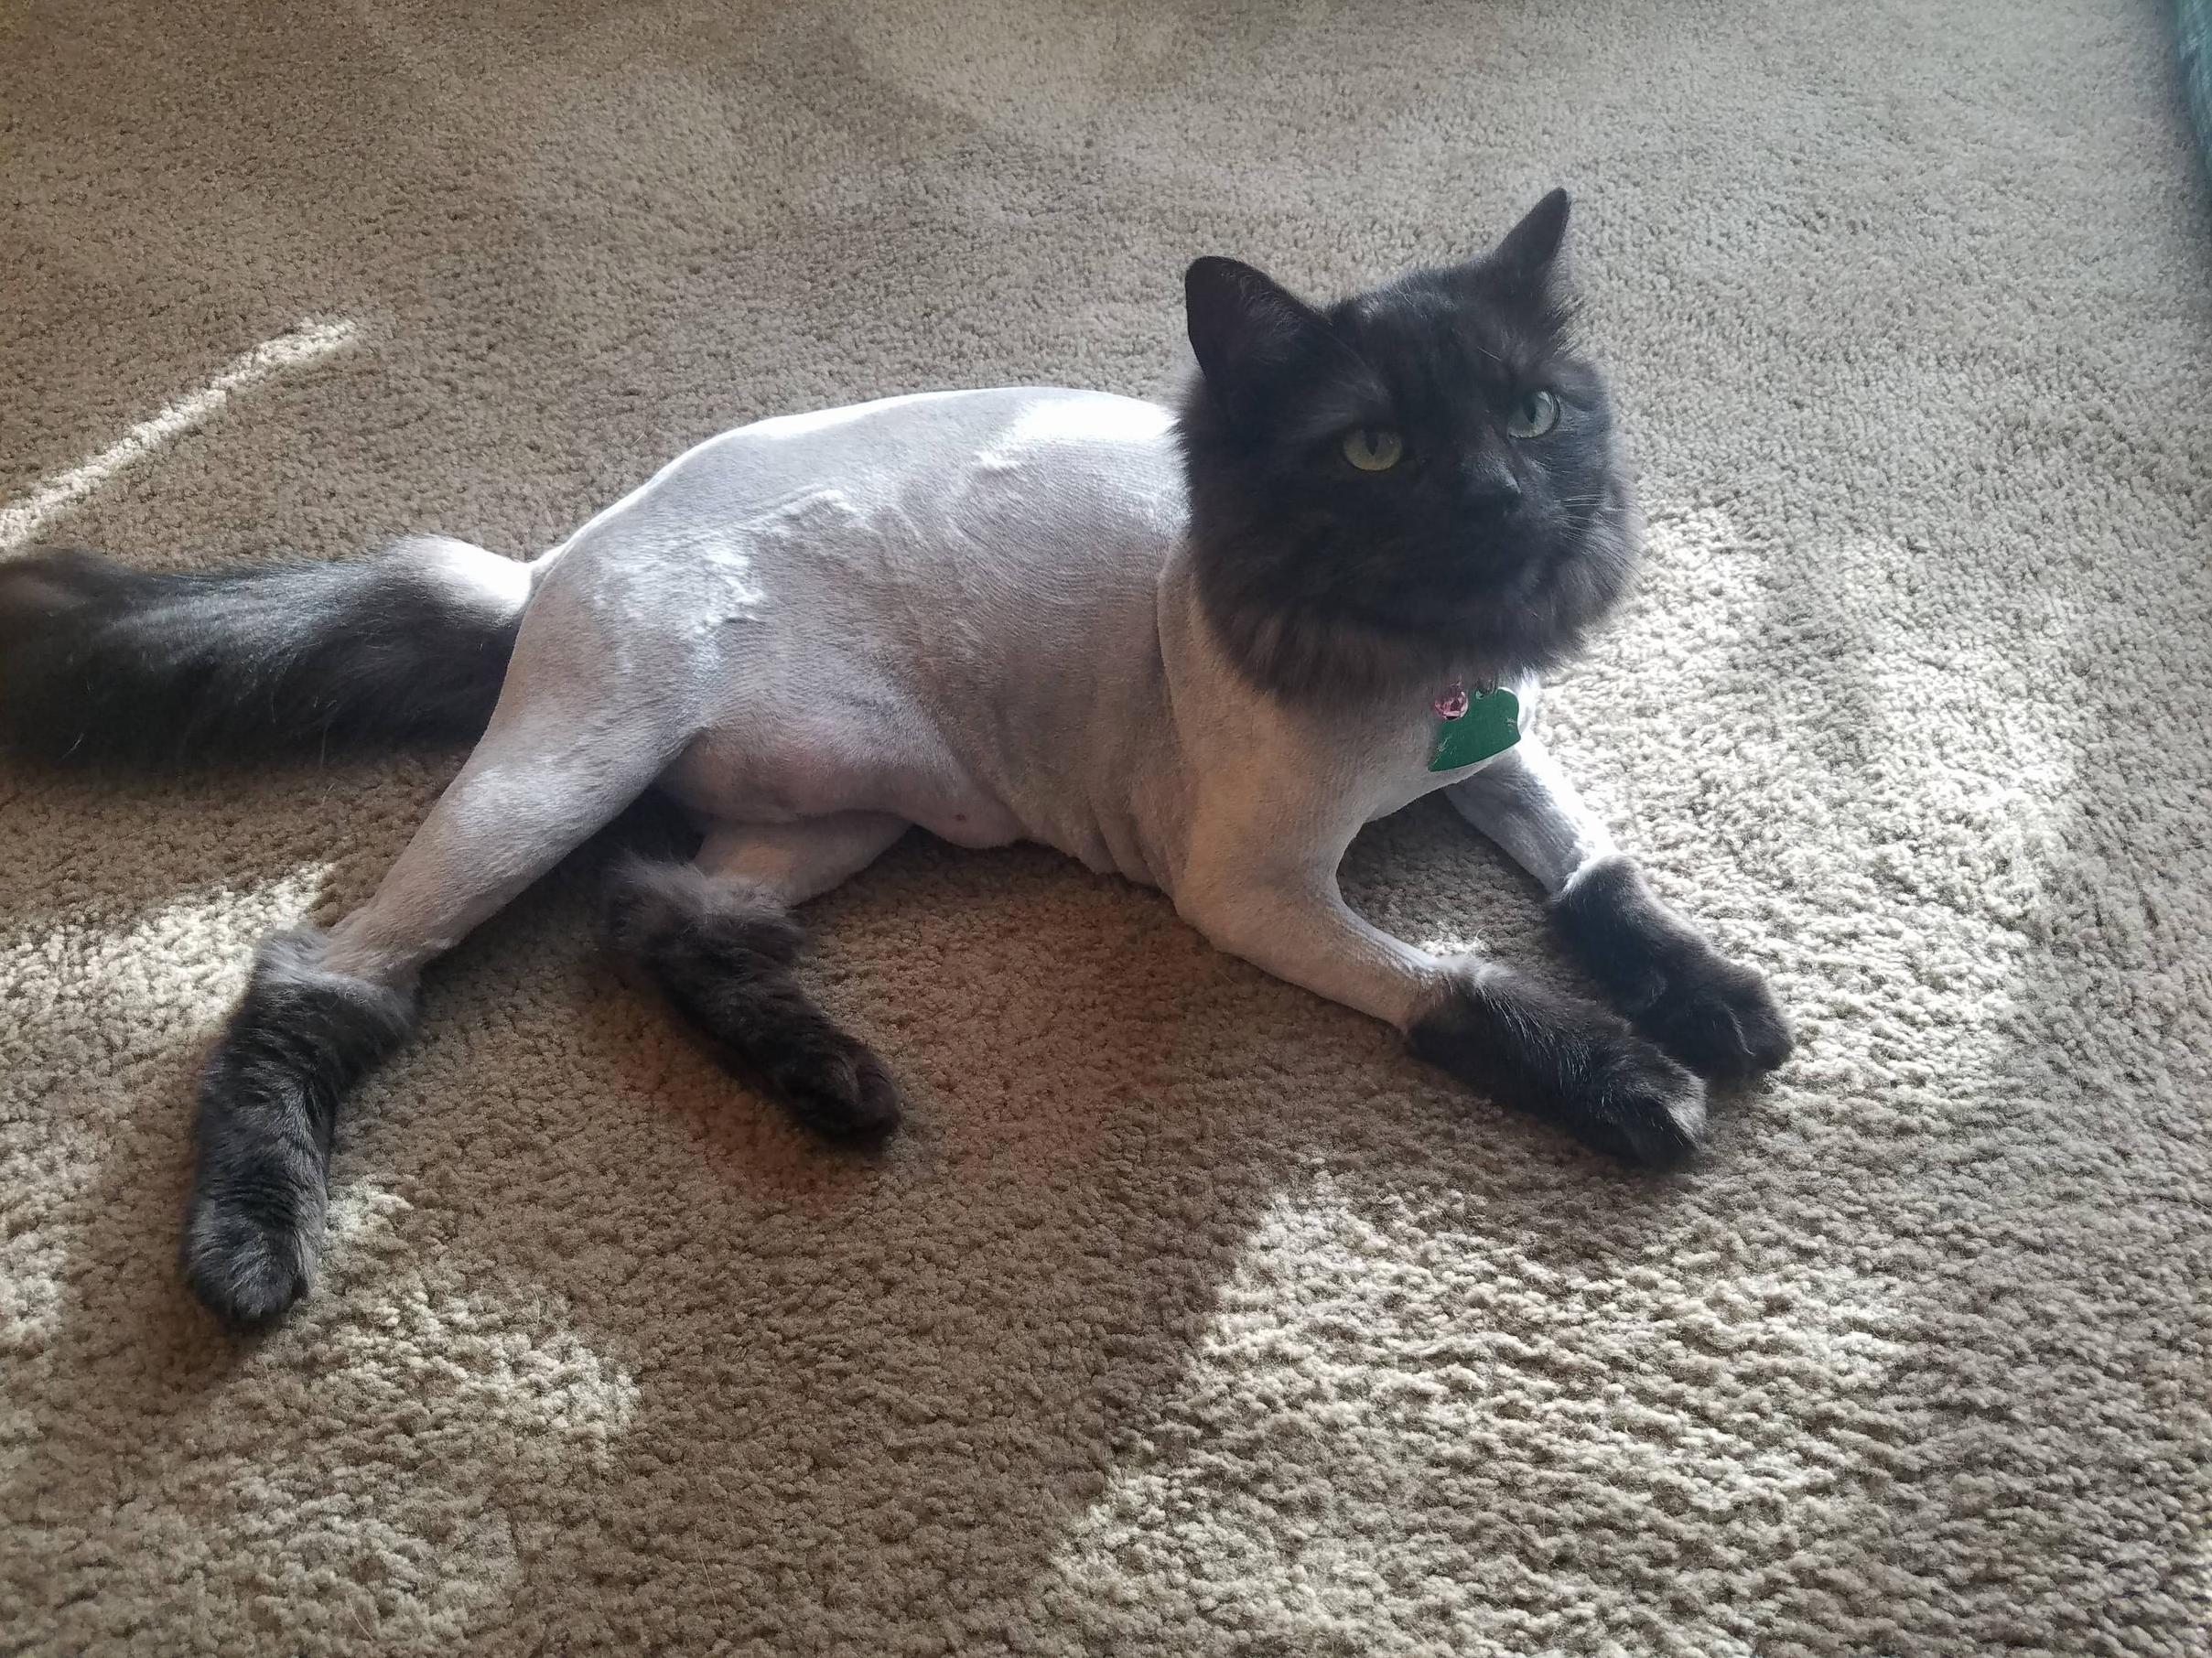 New haircut for kitty